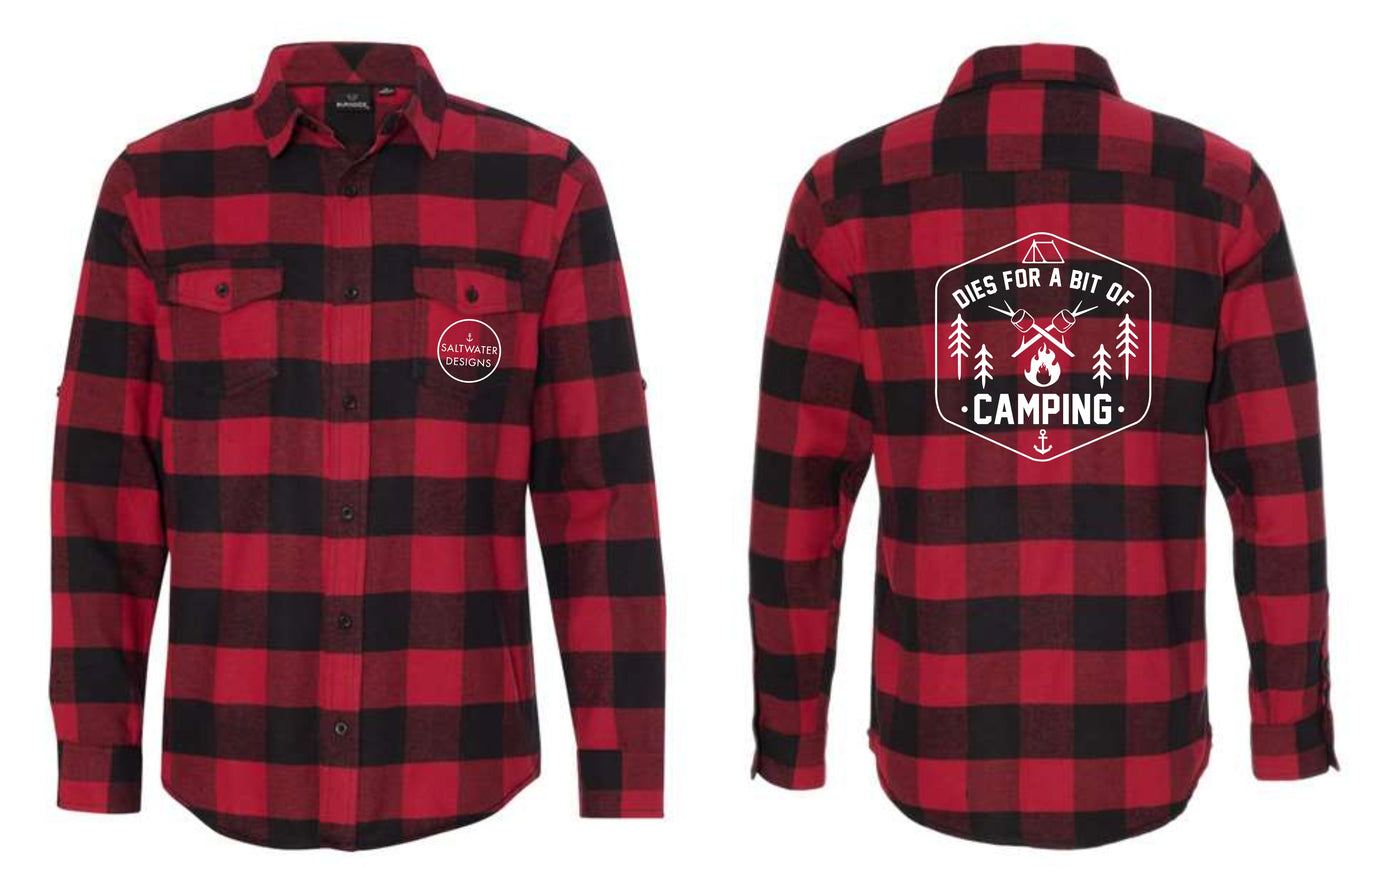 "Dies For A Bit Of Camping" Unisex Plaid Flannel Shirt